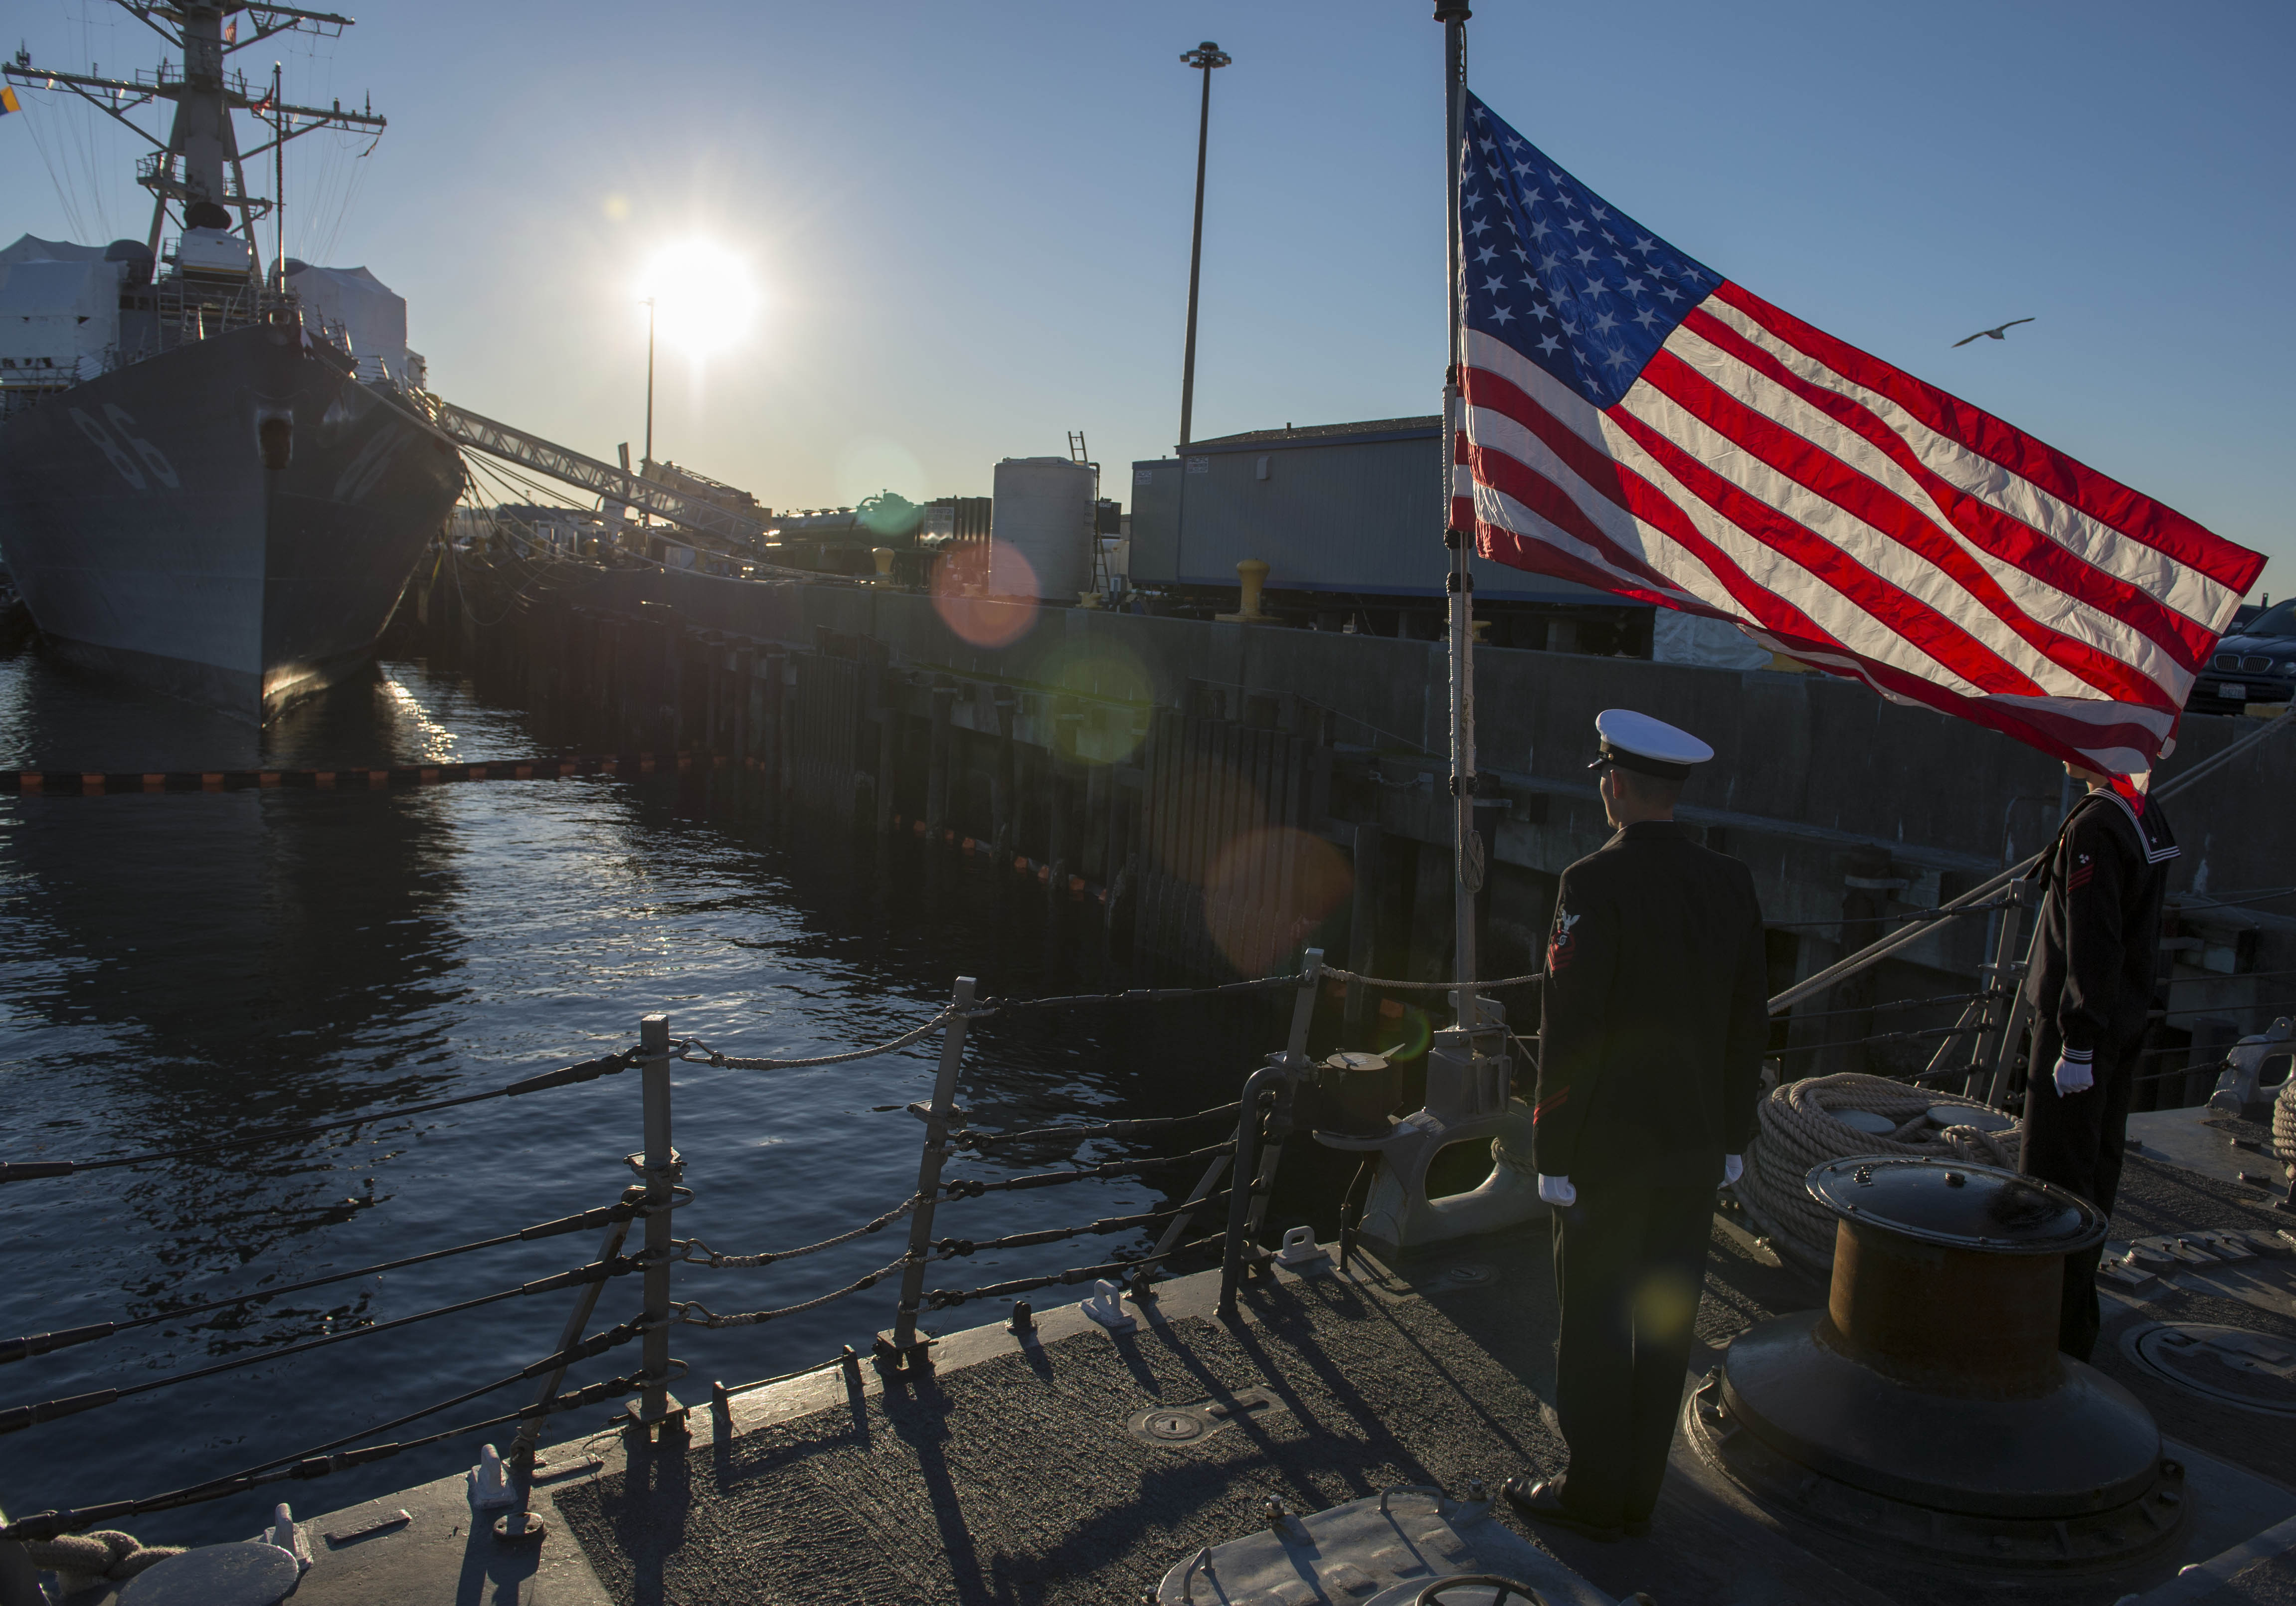 EVERETT, Wash. (Nov. 12, 2014) Sailors assigned to the Oliver Hazard Perry-class frigate USS Ingraham (FFG 61) prepare to haul down ship's colors during a decommissioning ceremony. Ingraham was decommissioned after 25 years of Naval service. U.S. Navy photo by Mass Communication Specialist 2nd Class Justin A. Johndro.